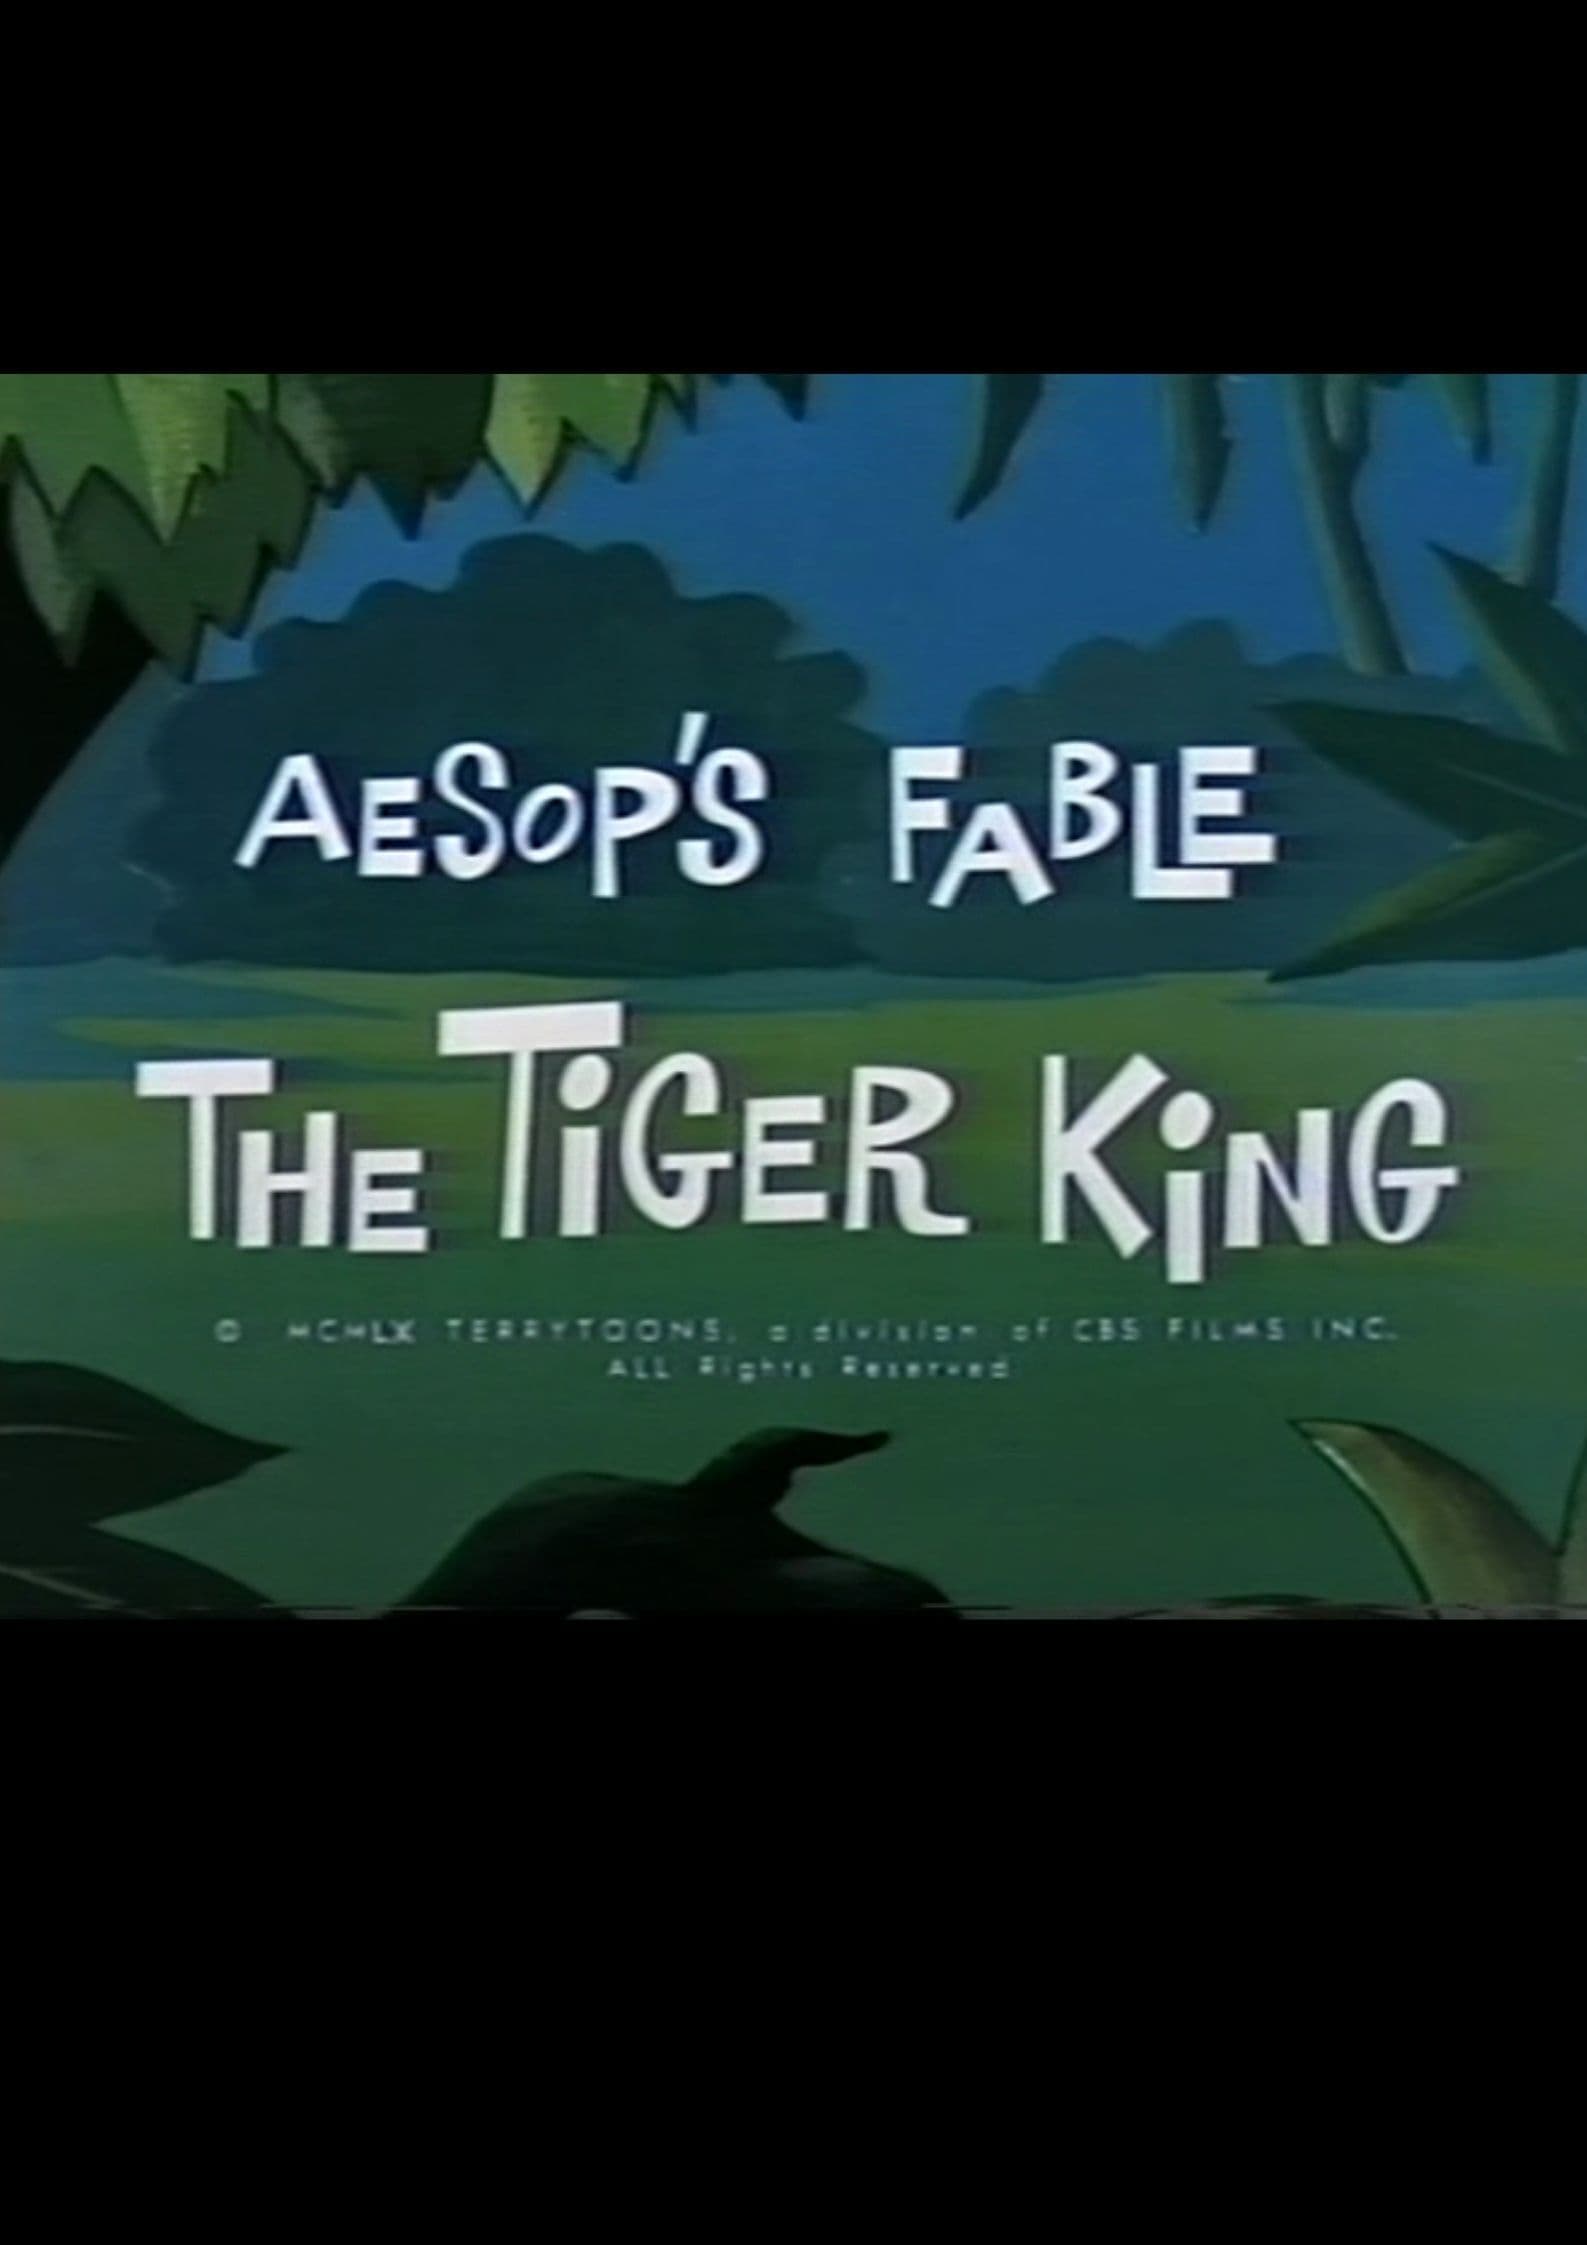 Aesop's Fable: The Tiger King